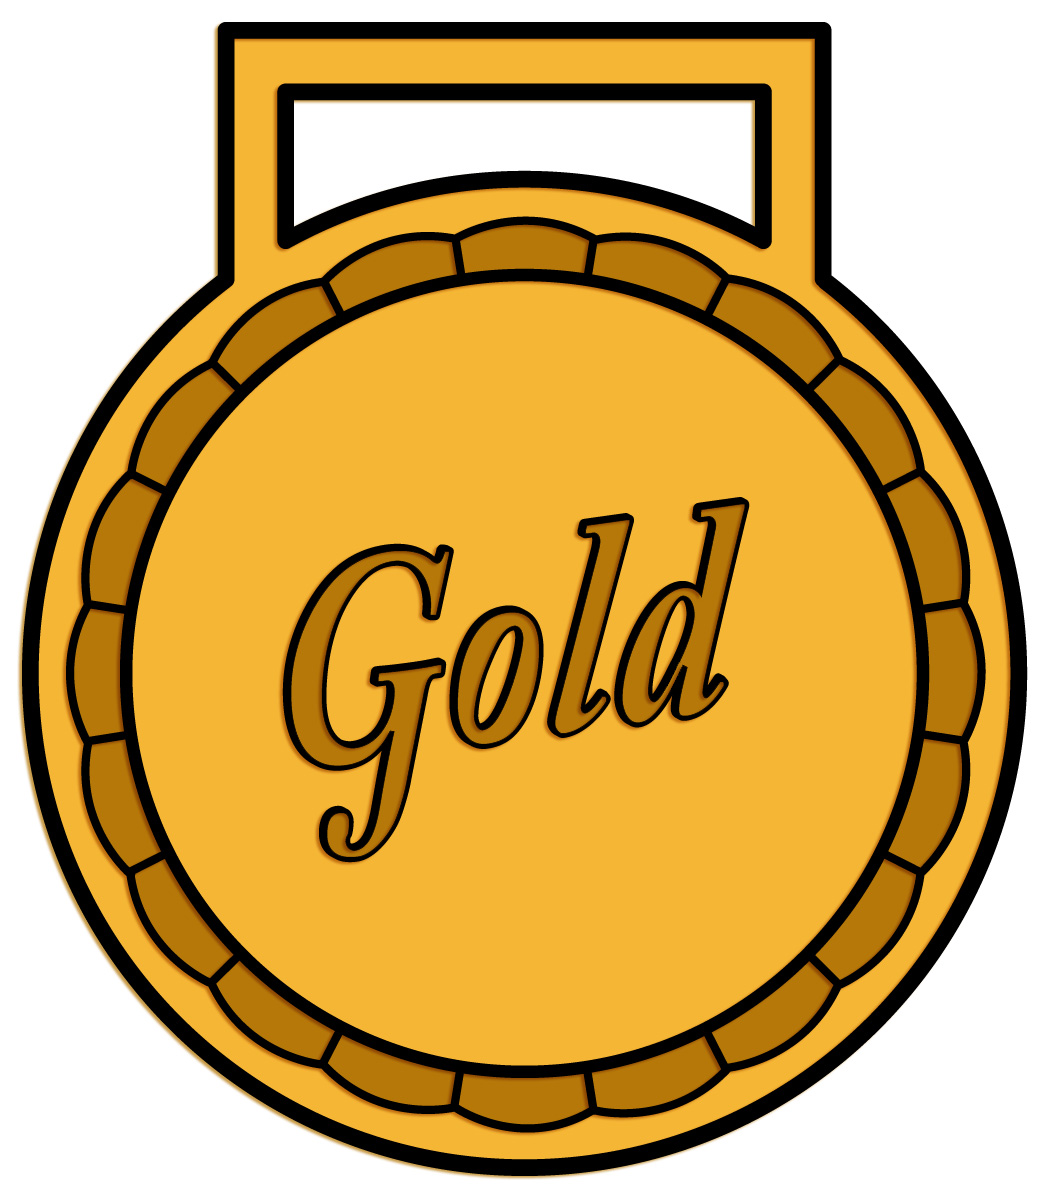 Gold medal clipart